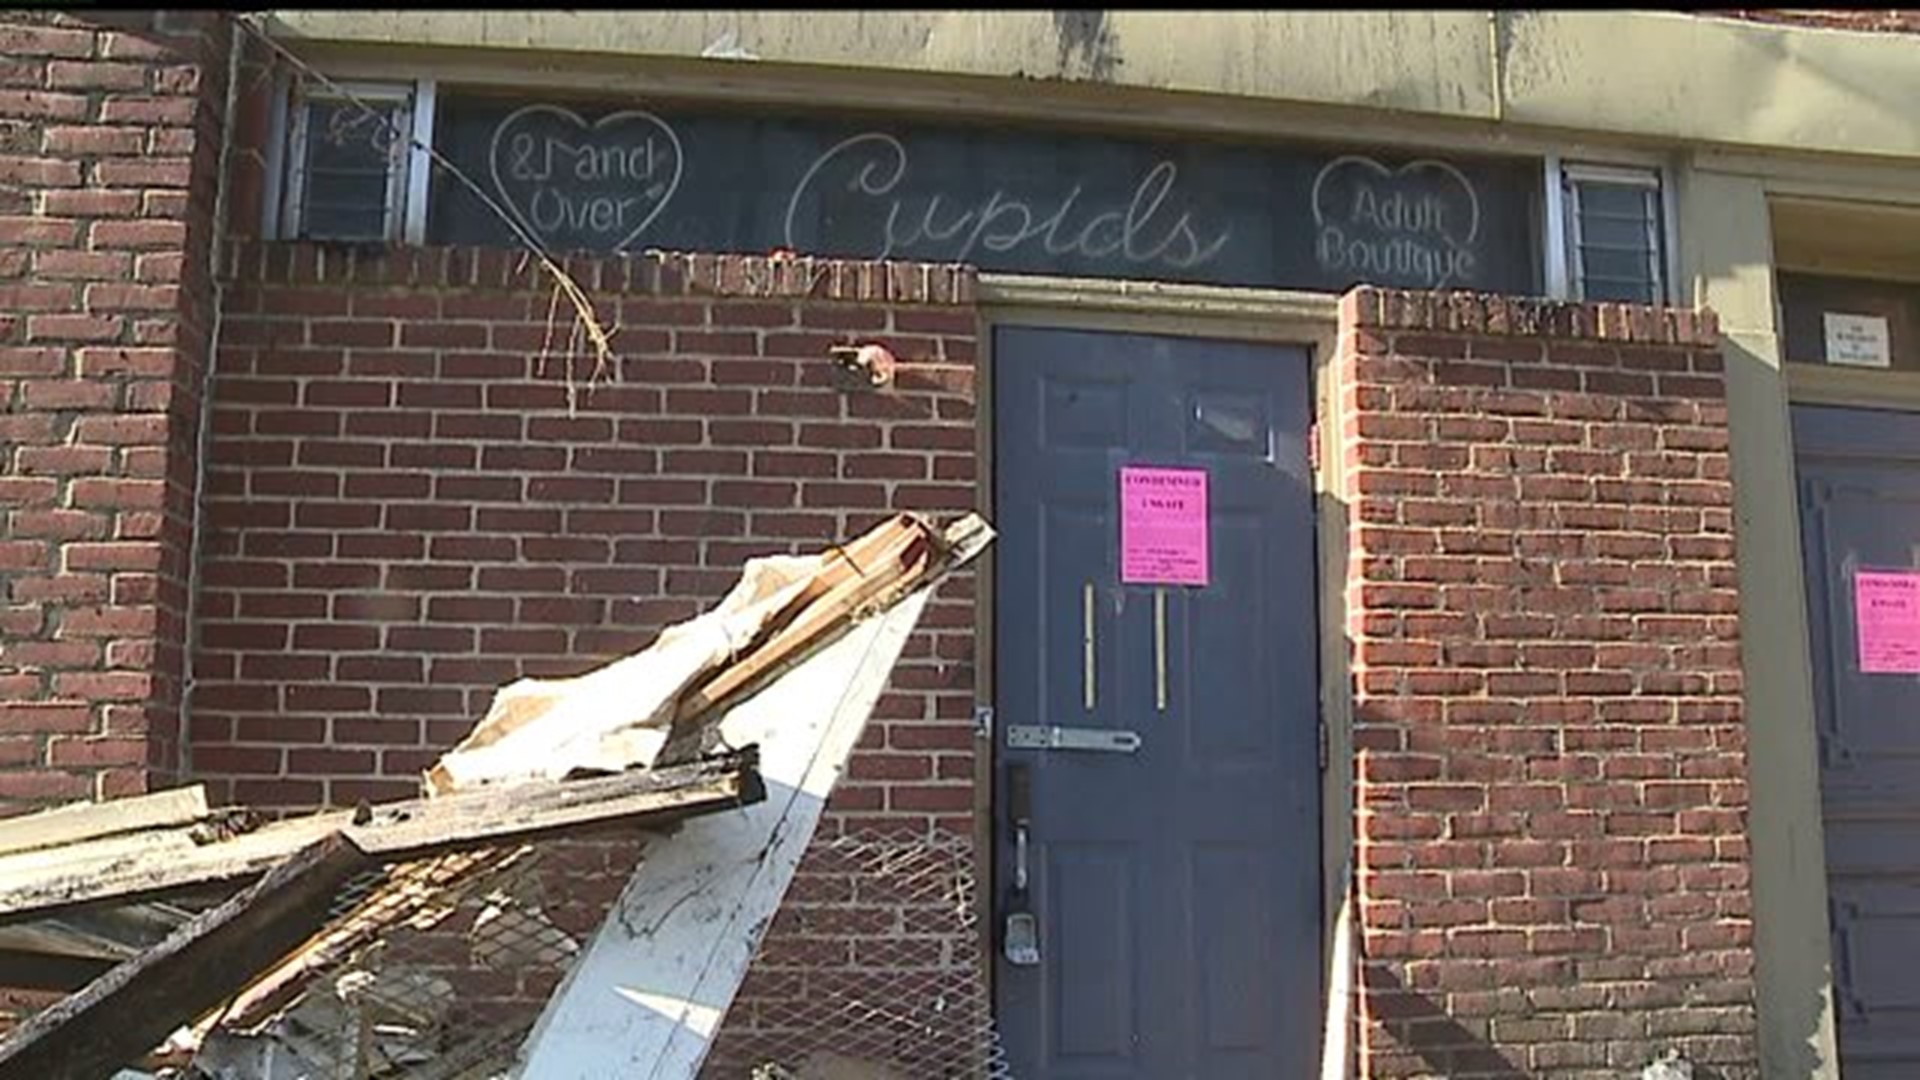 "Cupid`s" damaged in apartment fire in York City